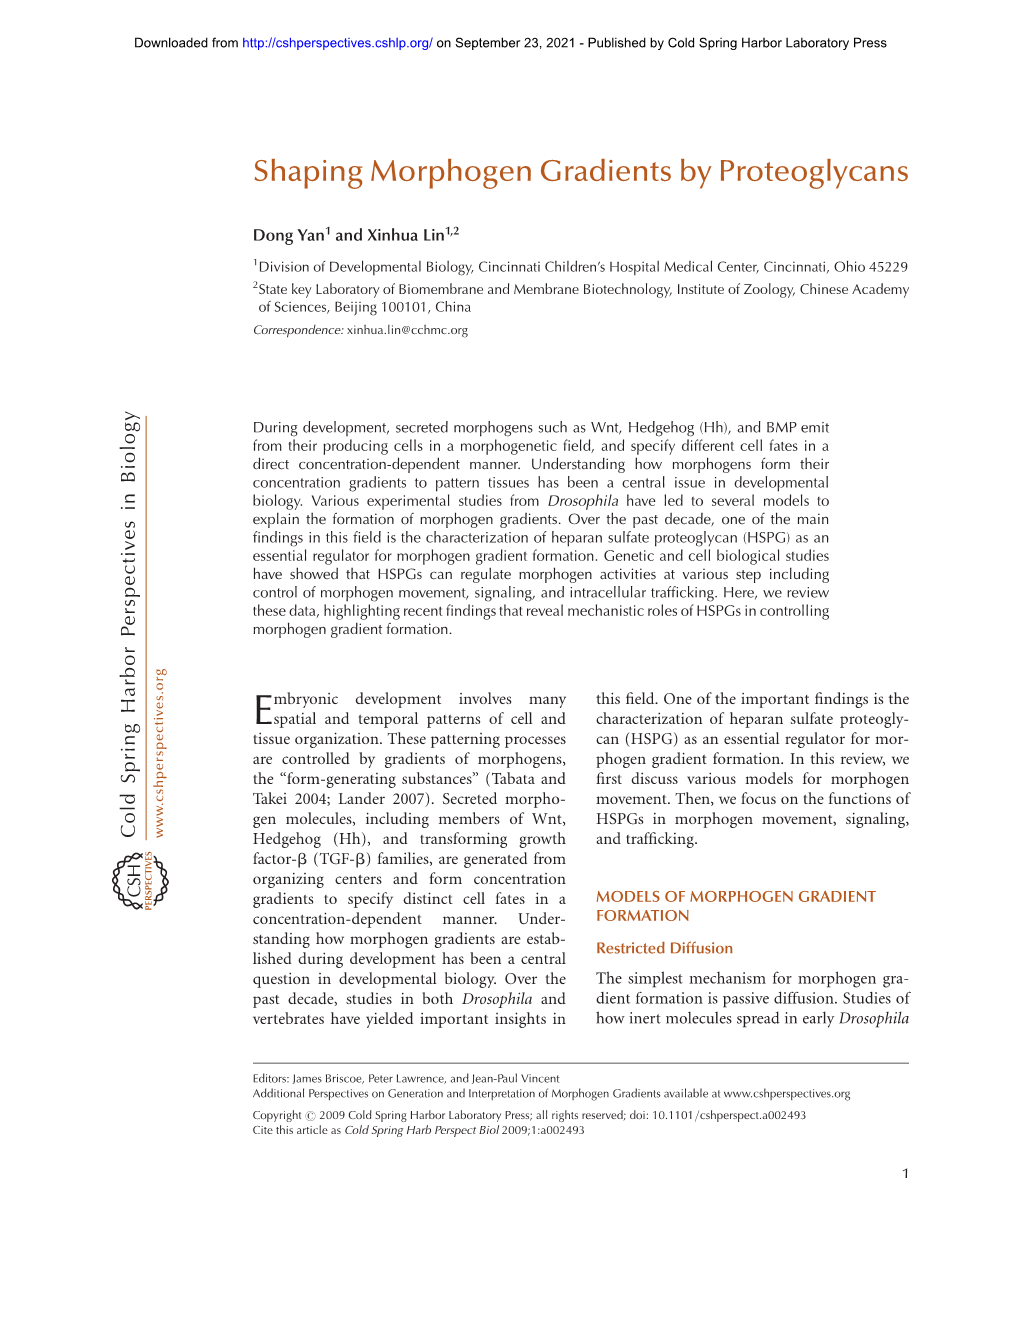 Shaping Morphogen Gradients by Proteoglycans